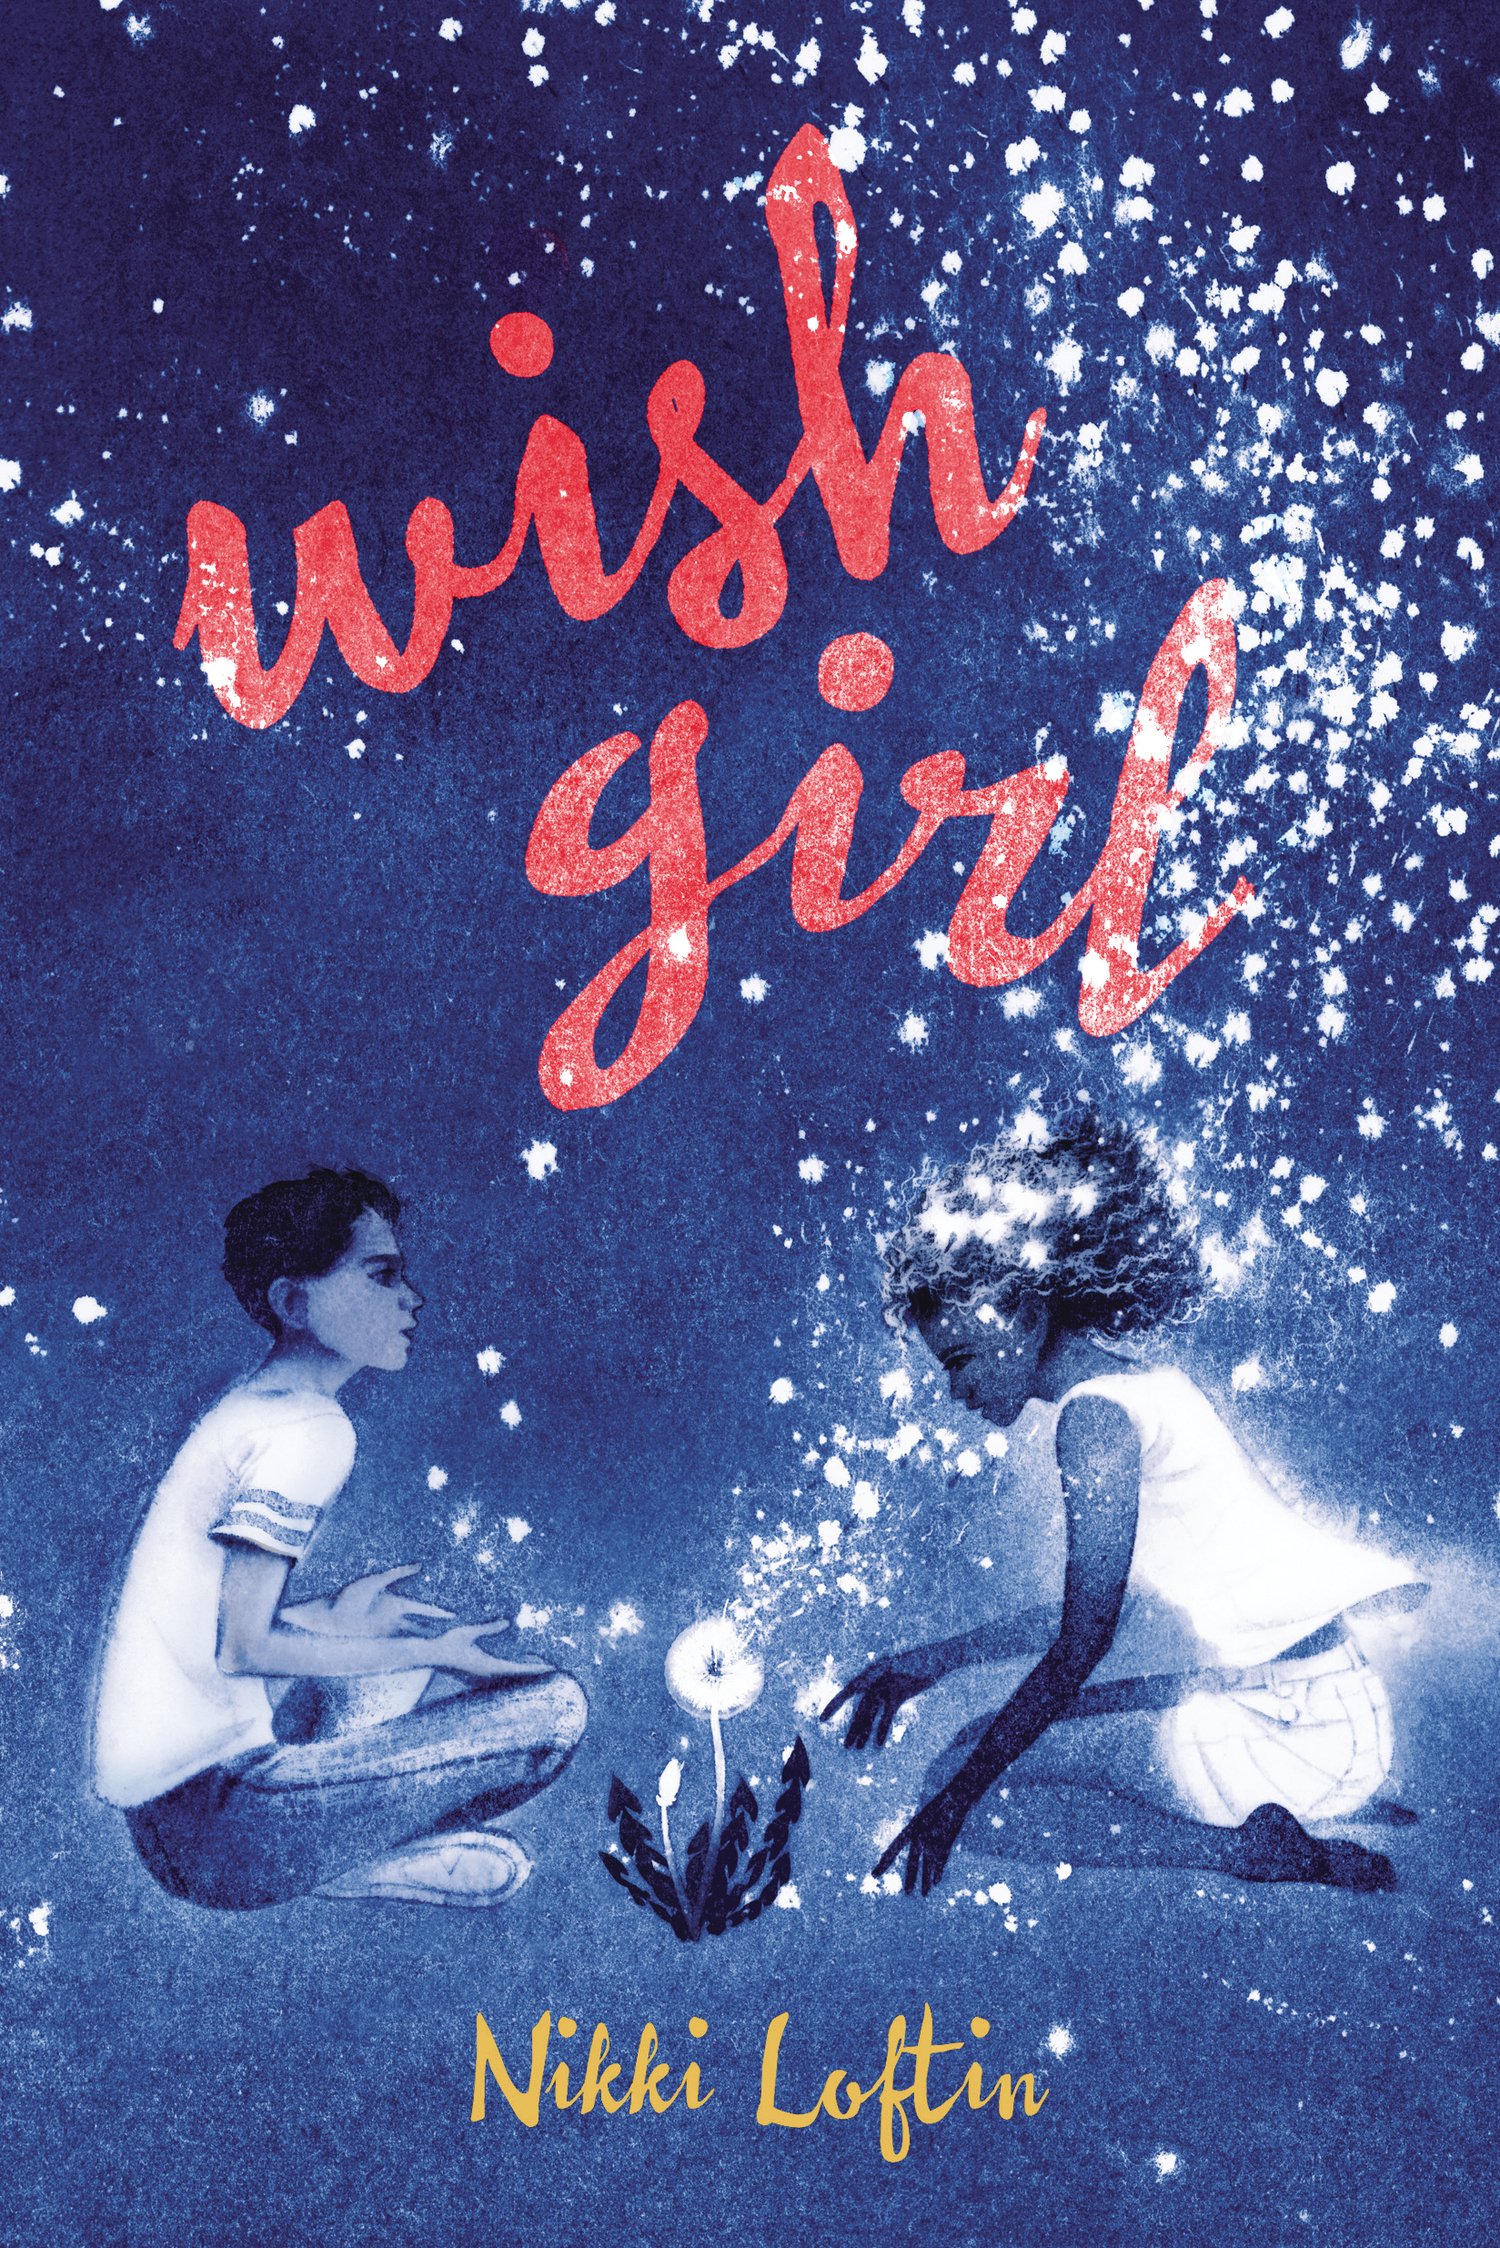 Wish Girl cover